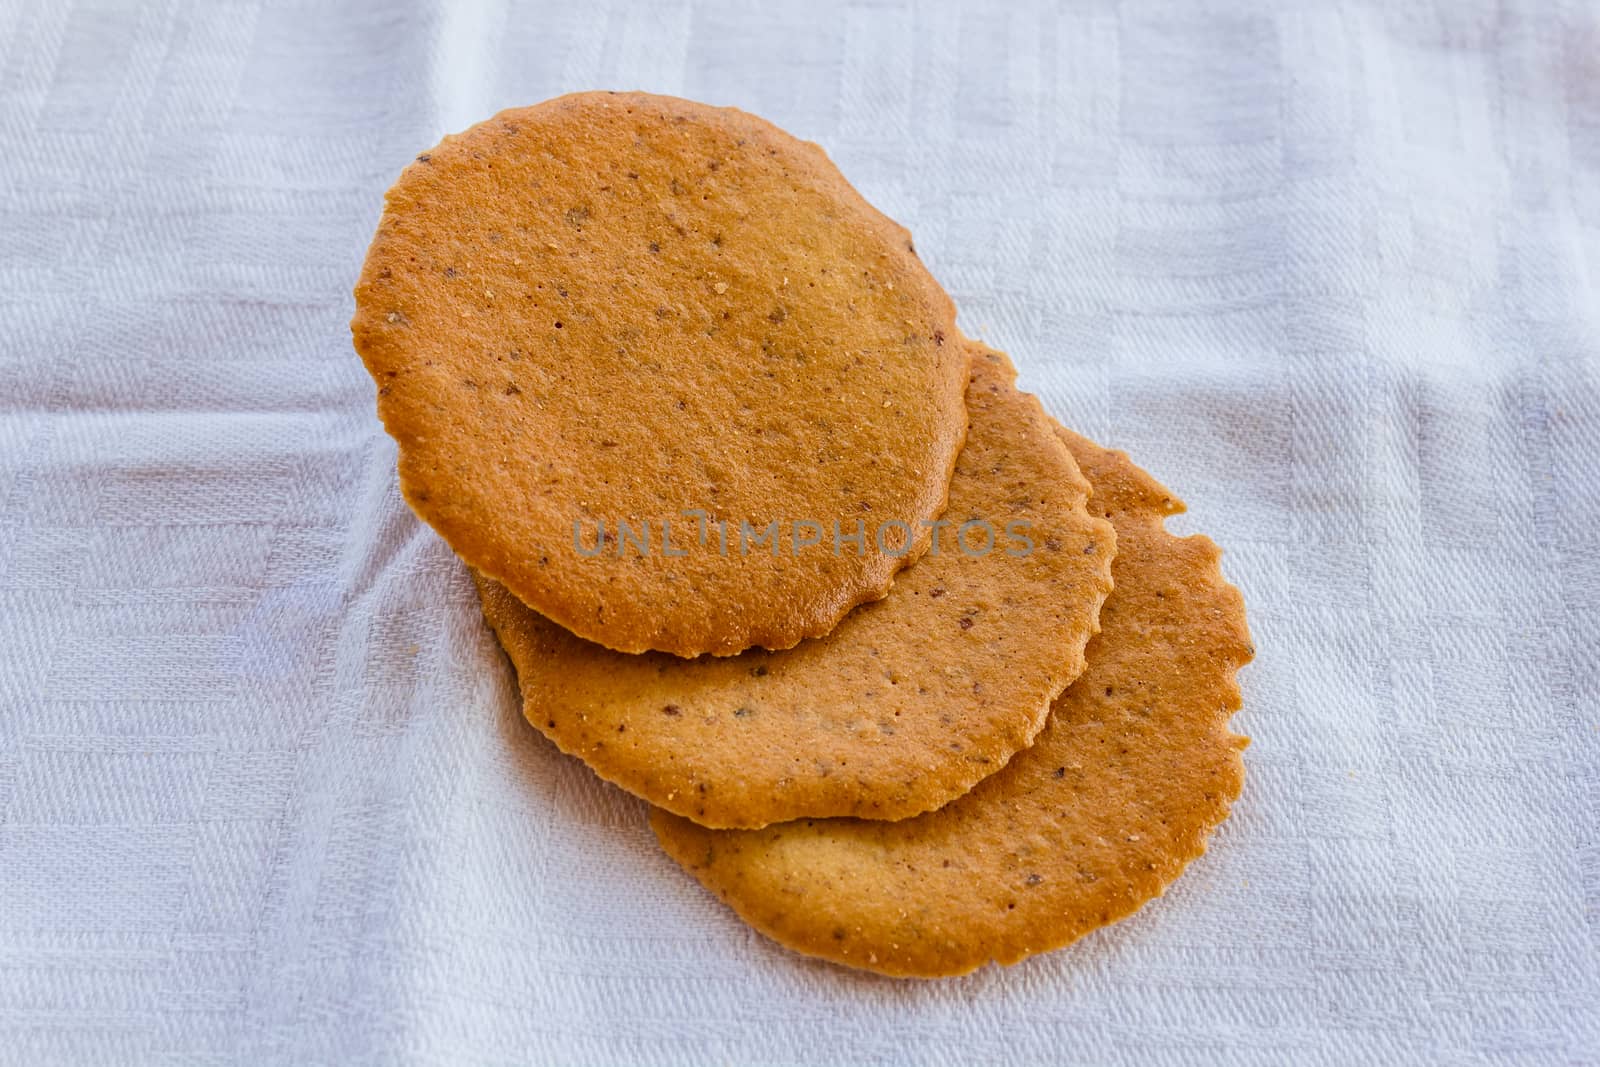 typical biscuits called tiles which are a specialty of the Aosta Valley,Italy